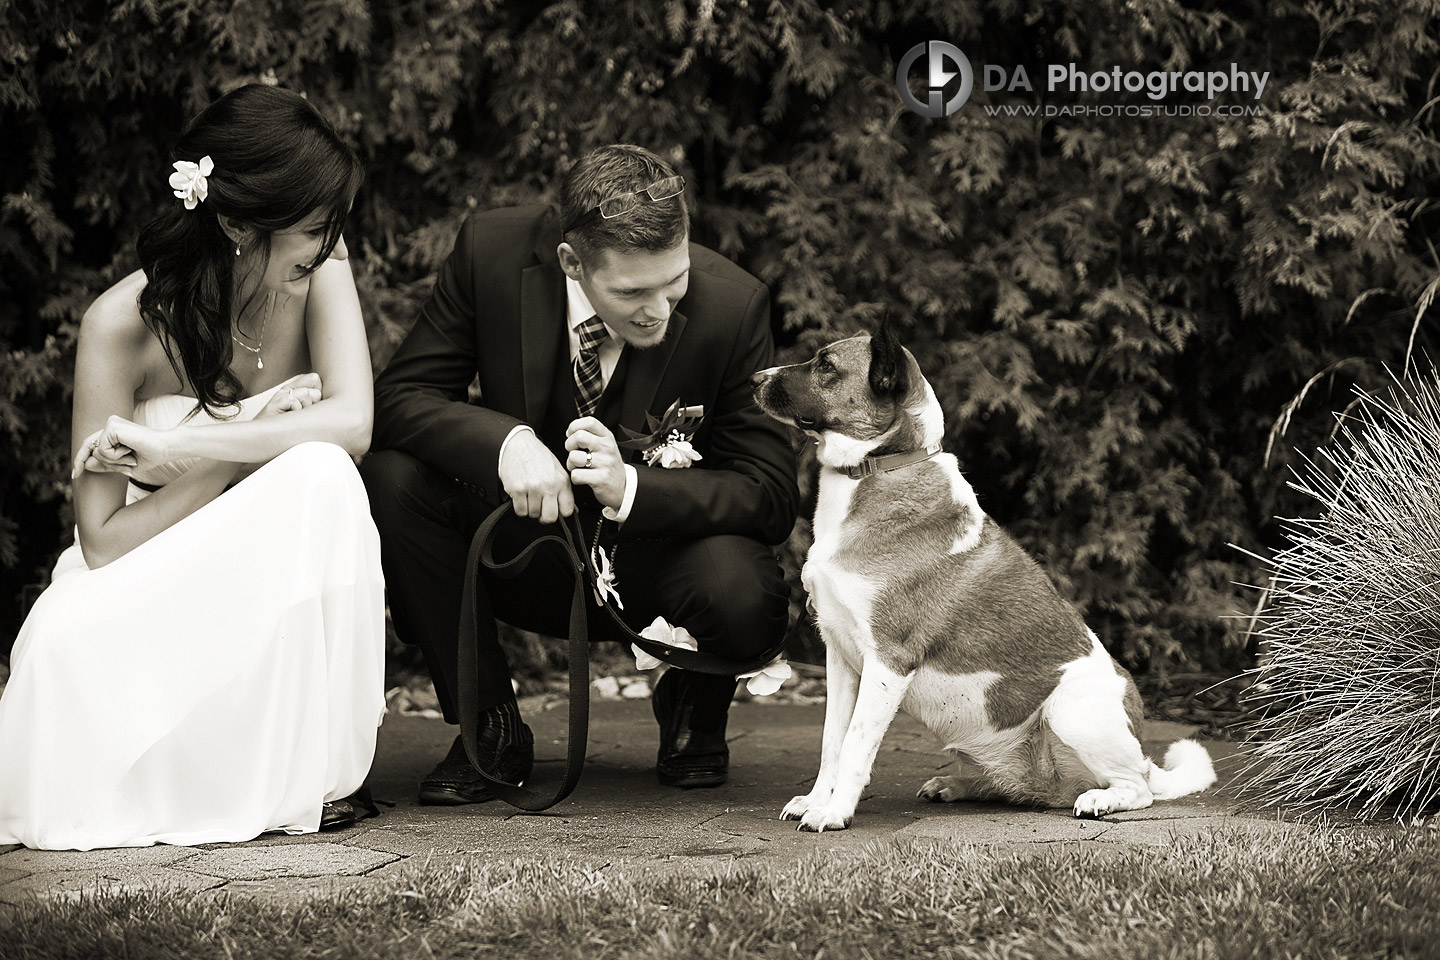 And they call it Puppy Love - DA Photography, wedding photography